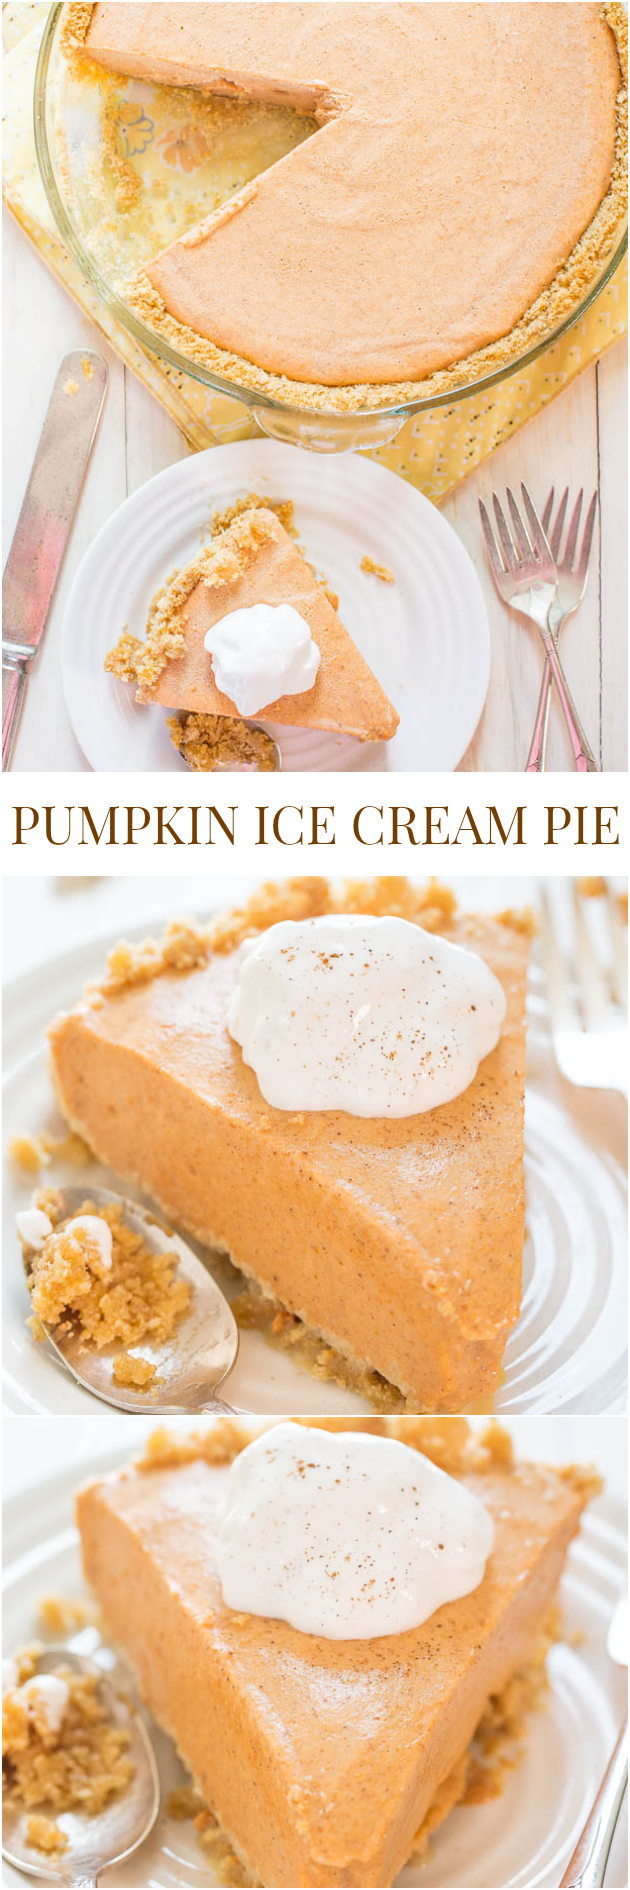 Pumpkin Ice Cream Pie - The easiest pumpkin pie you'll ever make! Put it on your Thanksgiving menu and save yourself pie-making stress!!